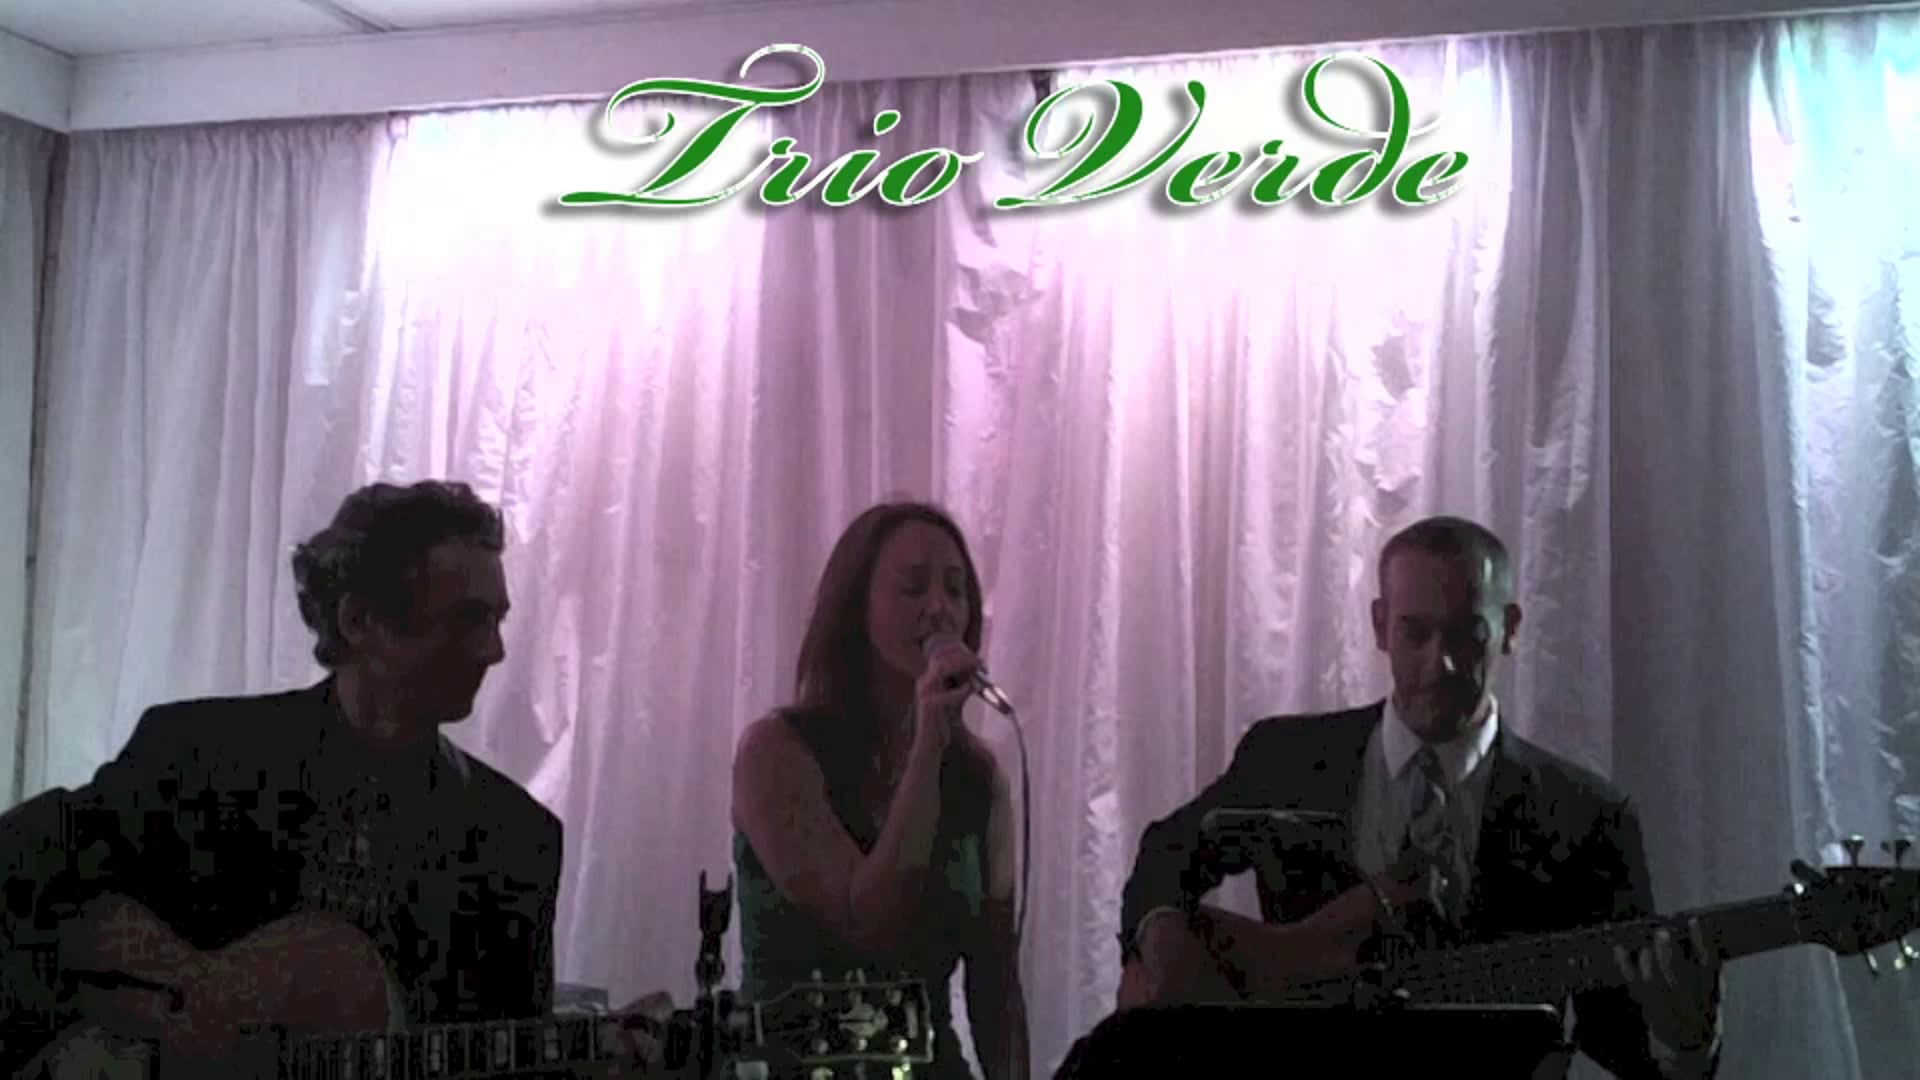 Promotional video thumbnail 1 for Trio Verde